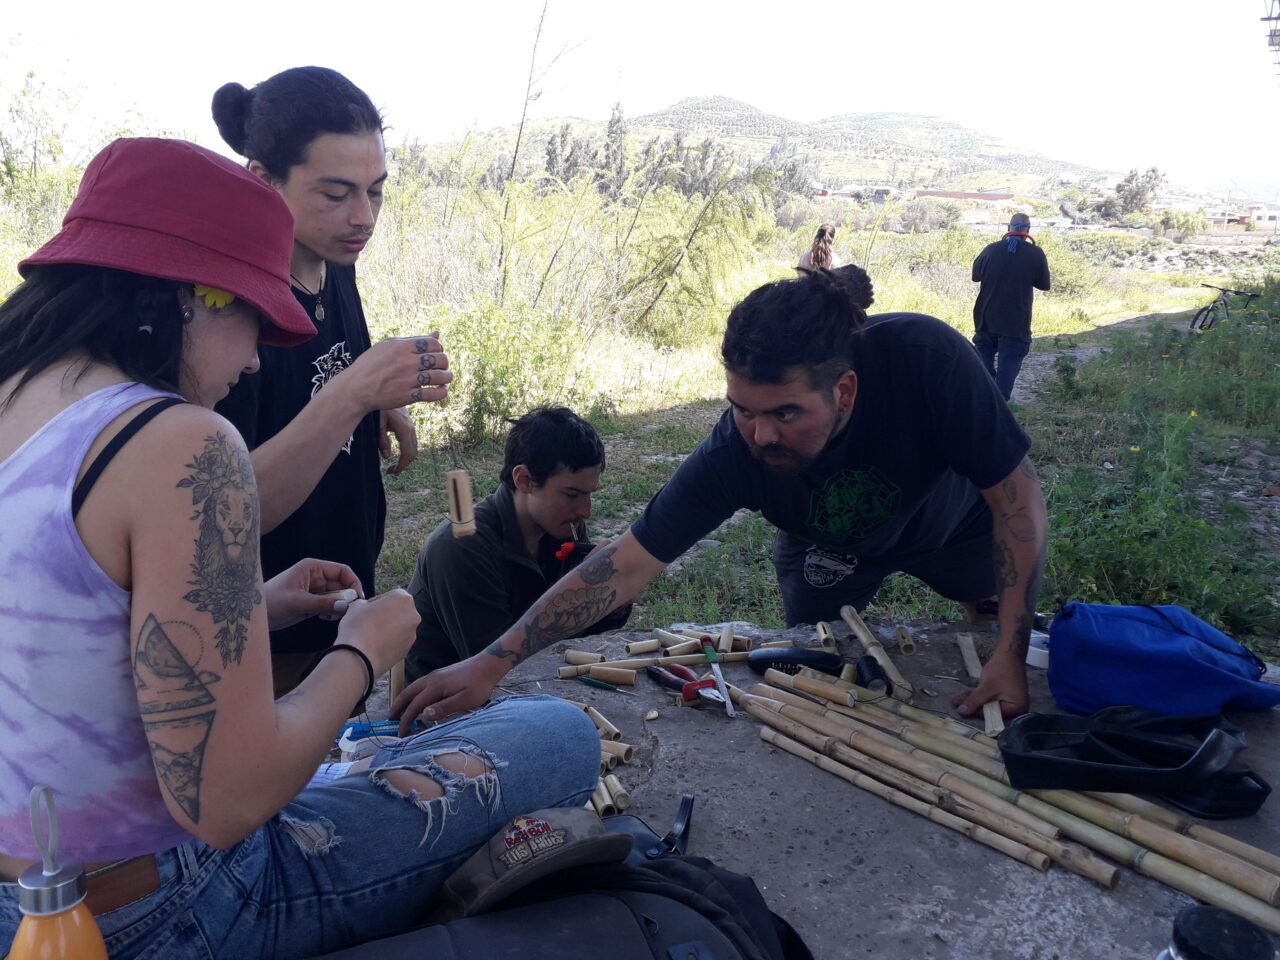 A group of people making birding instruments